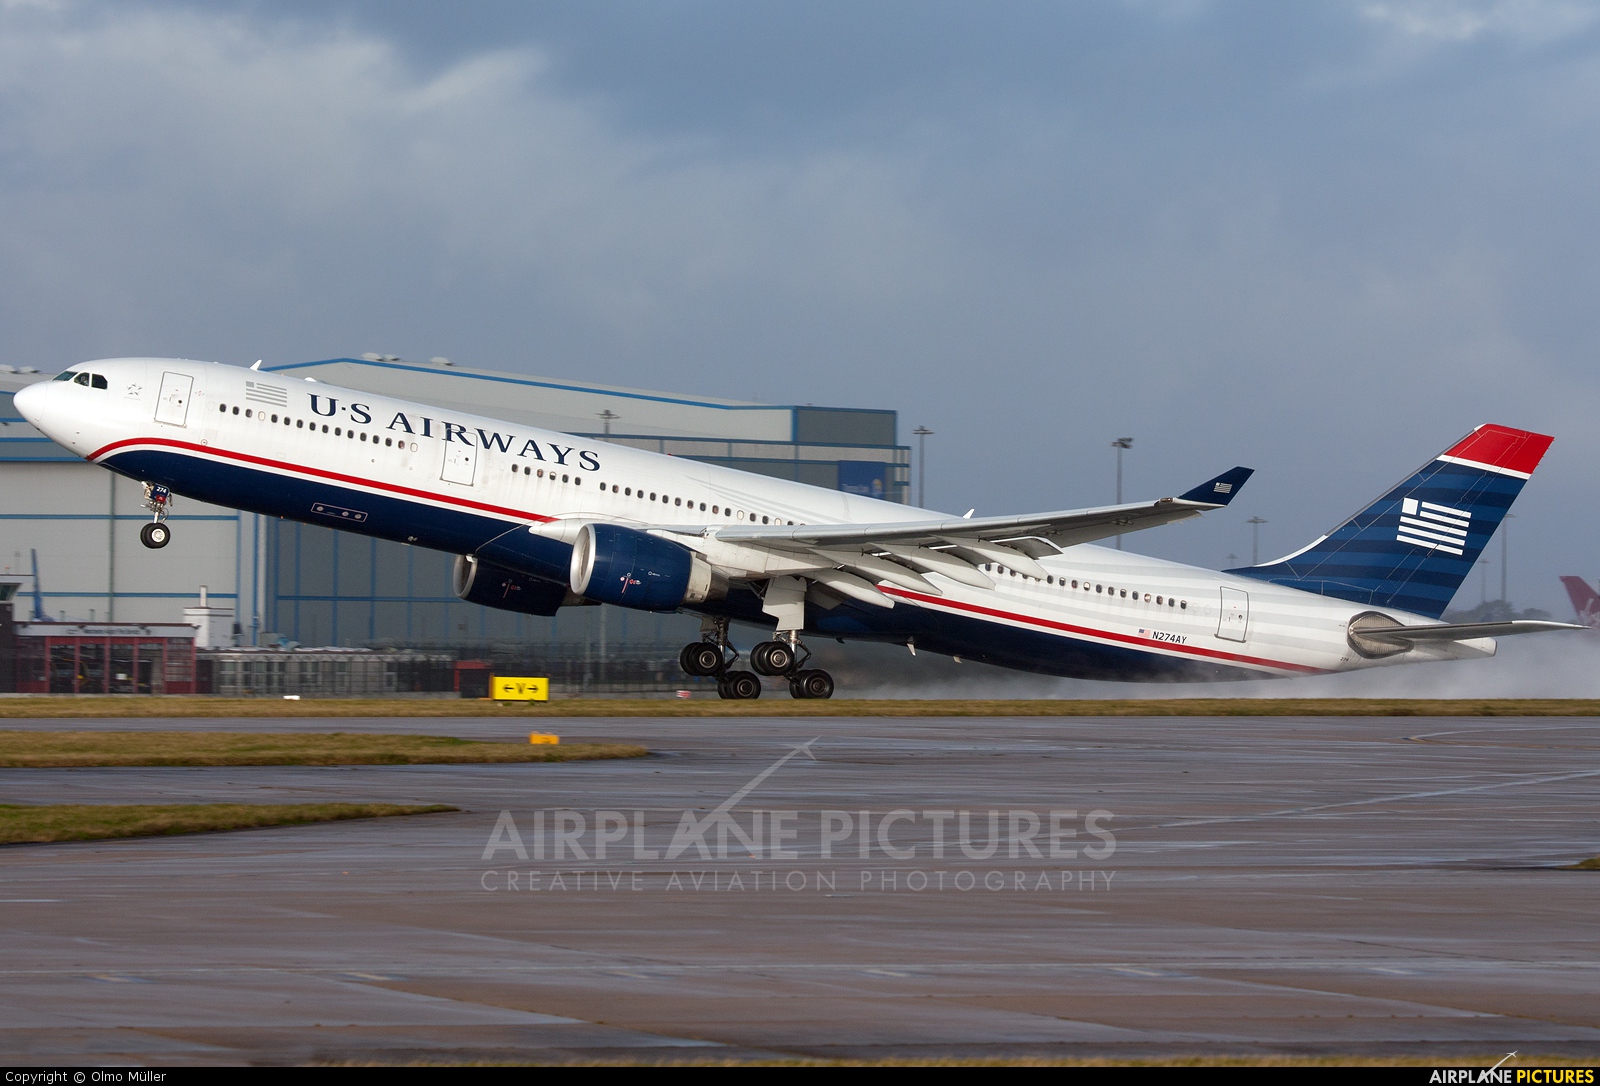 N274AY - US Airways Airbus A330-300 at Manchester | Photo ID 175269 |  Airplane-Pictures.net